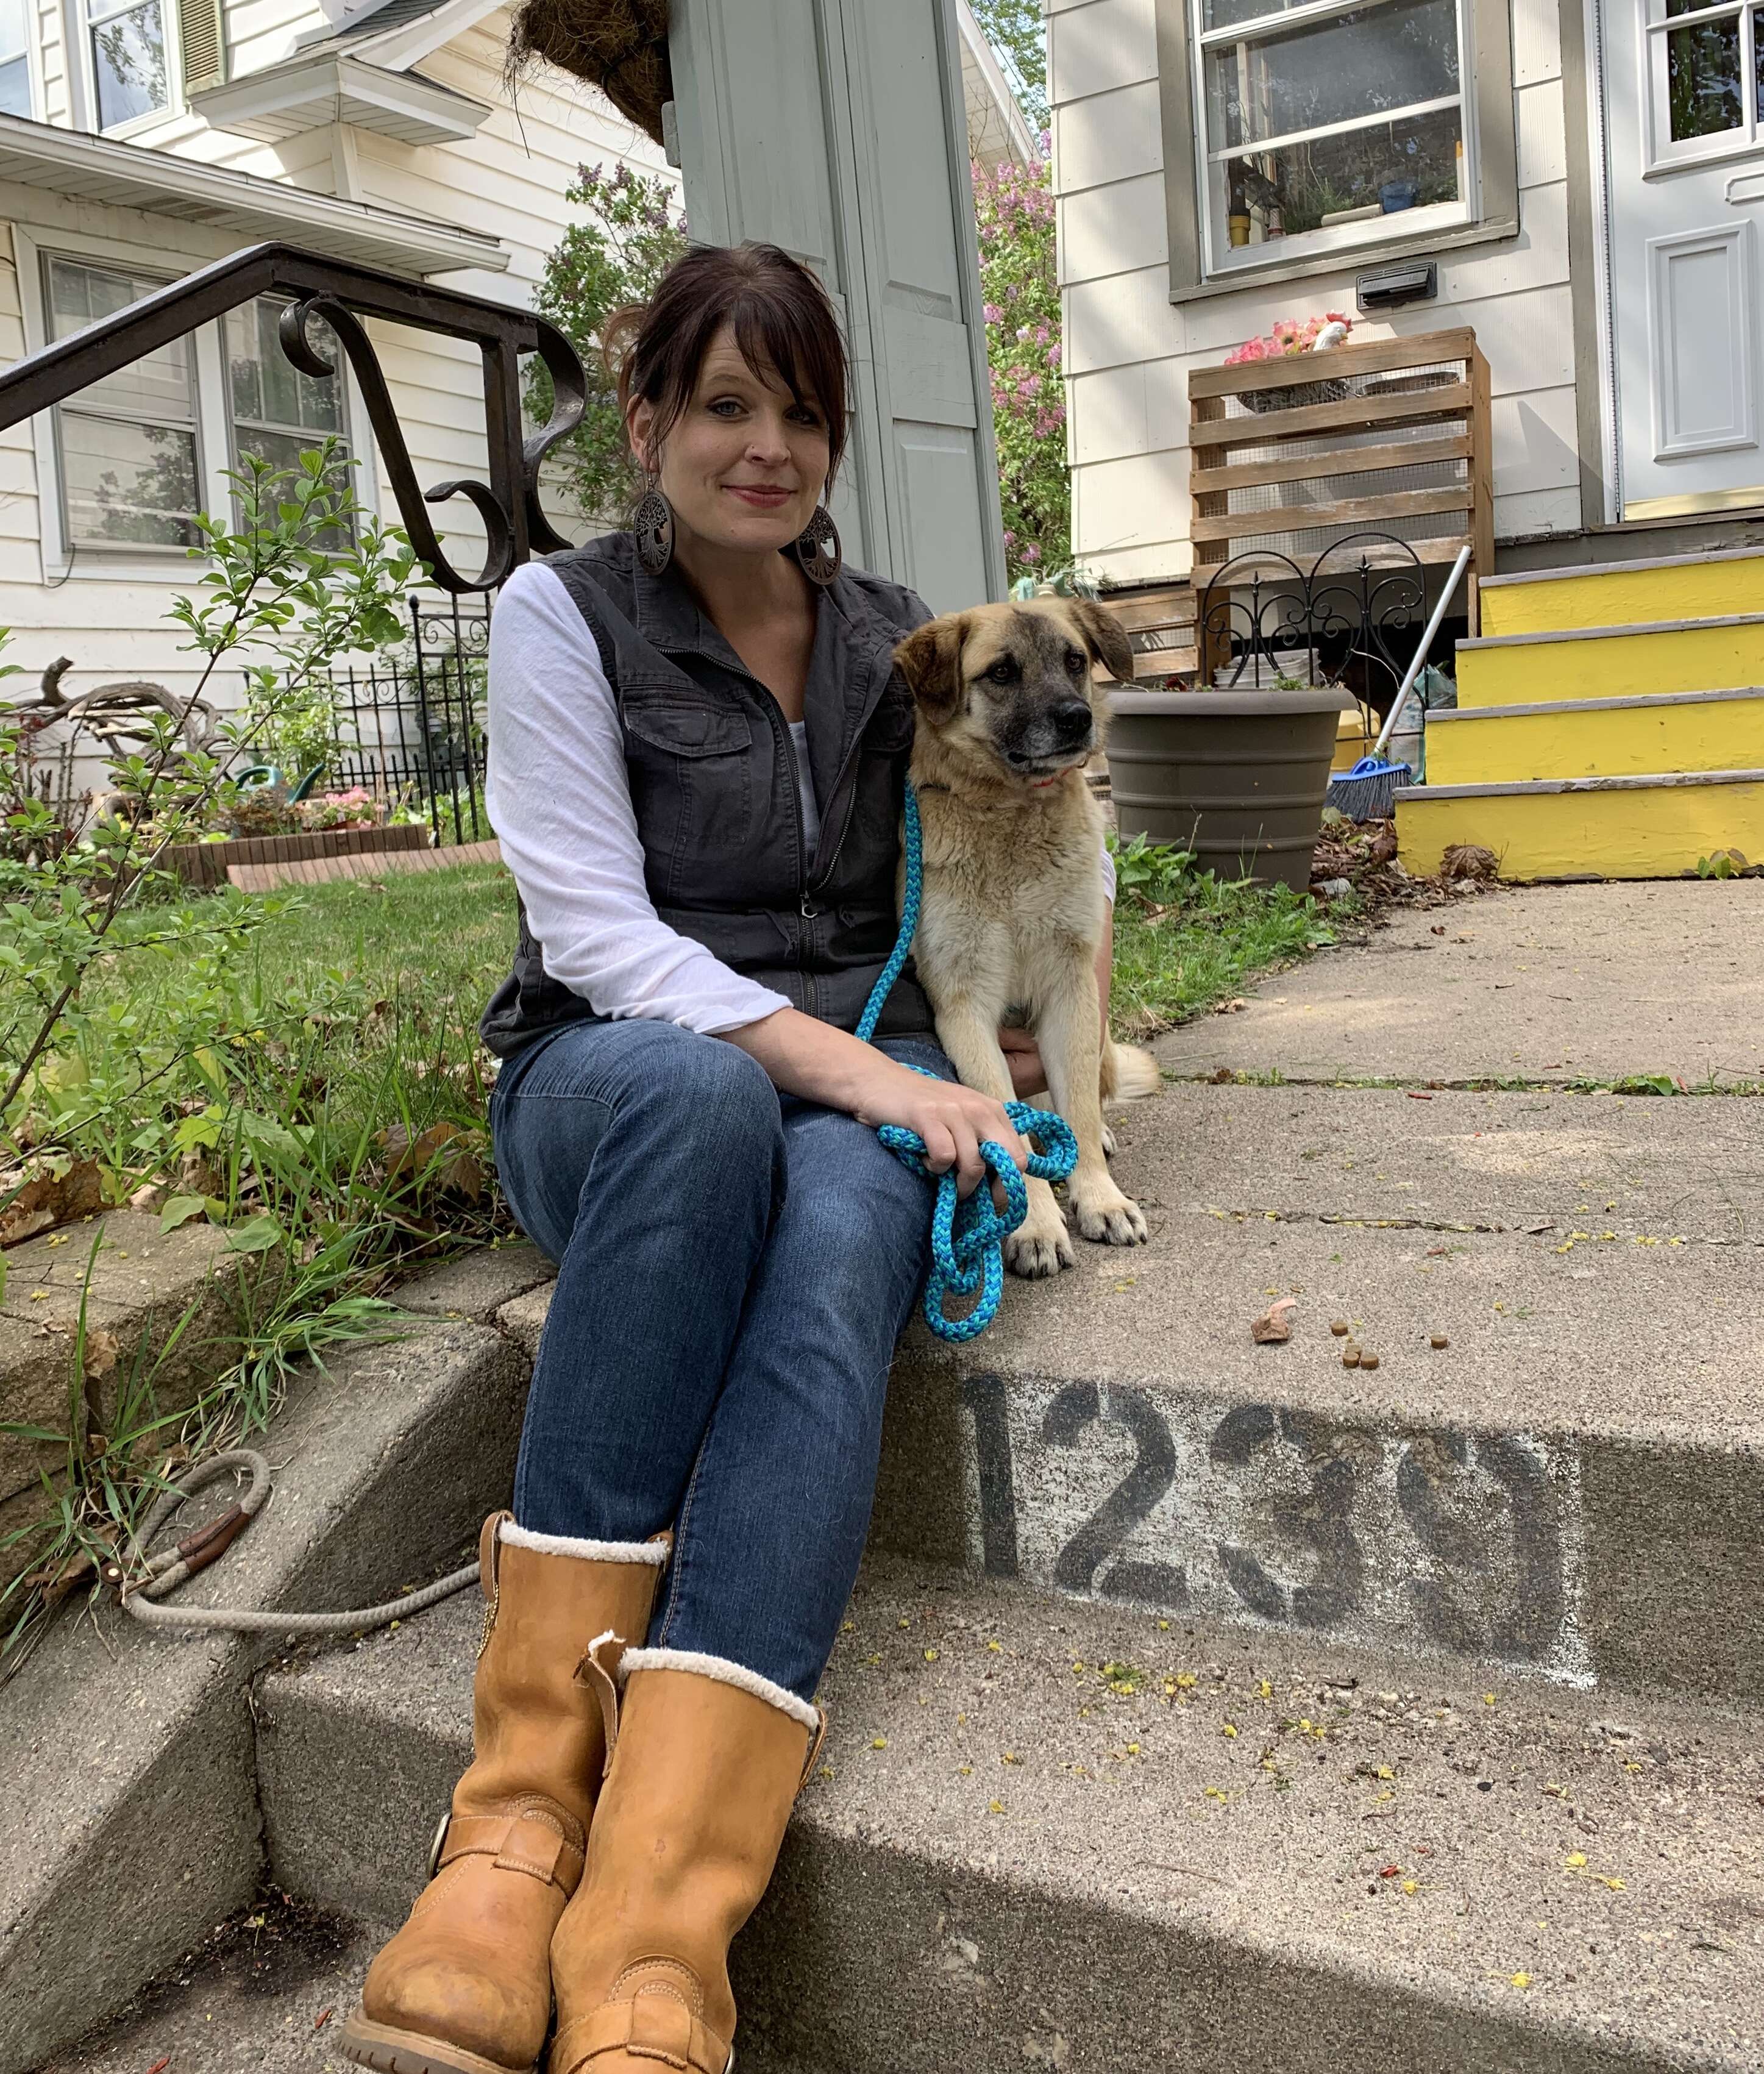 Foster mom reunites with lost dog